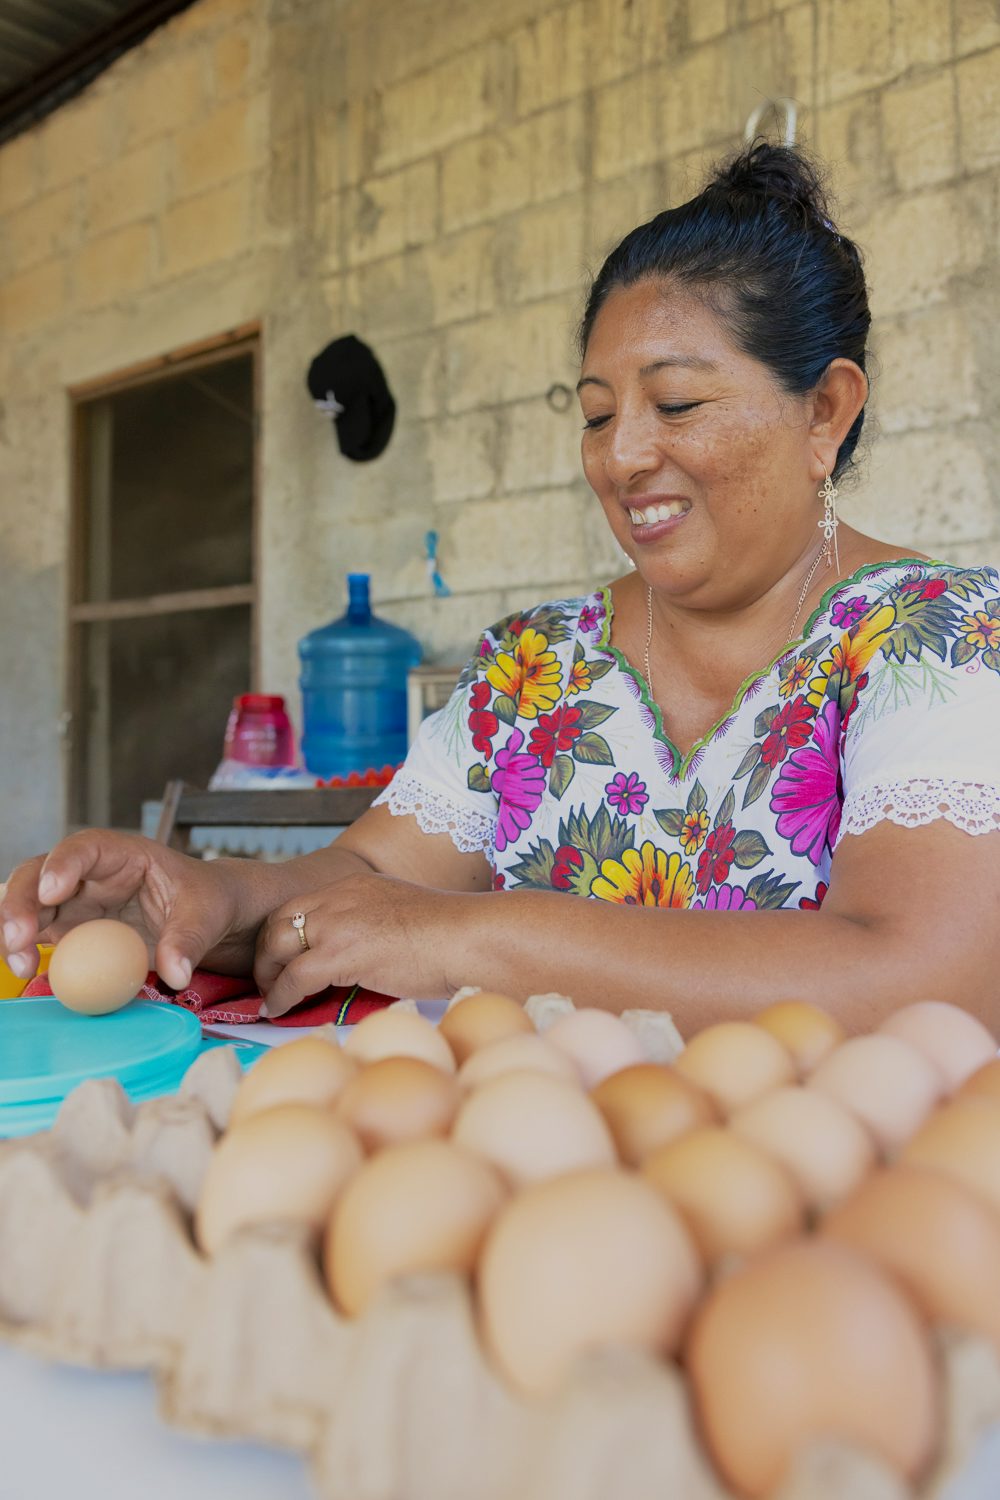 A woman sits at a table with several crates of eggs in front of her.